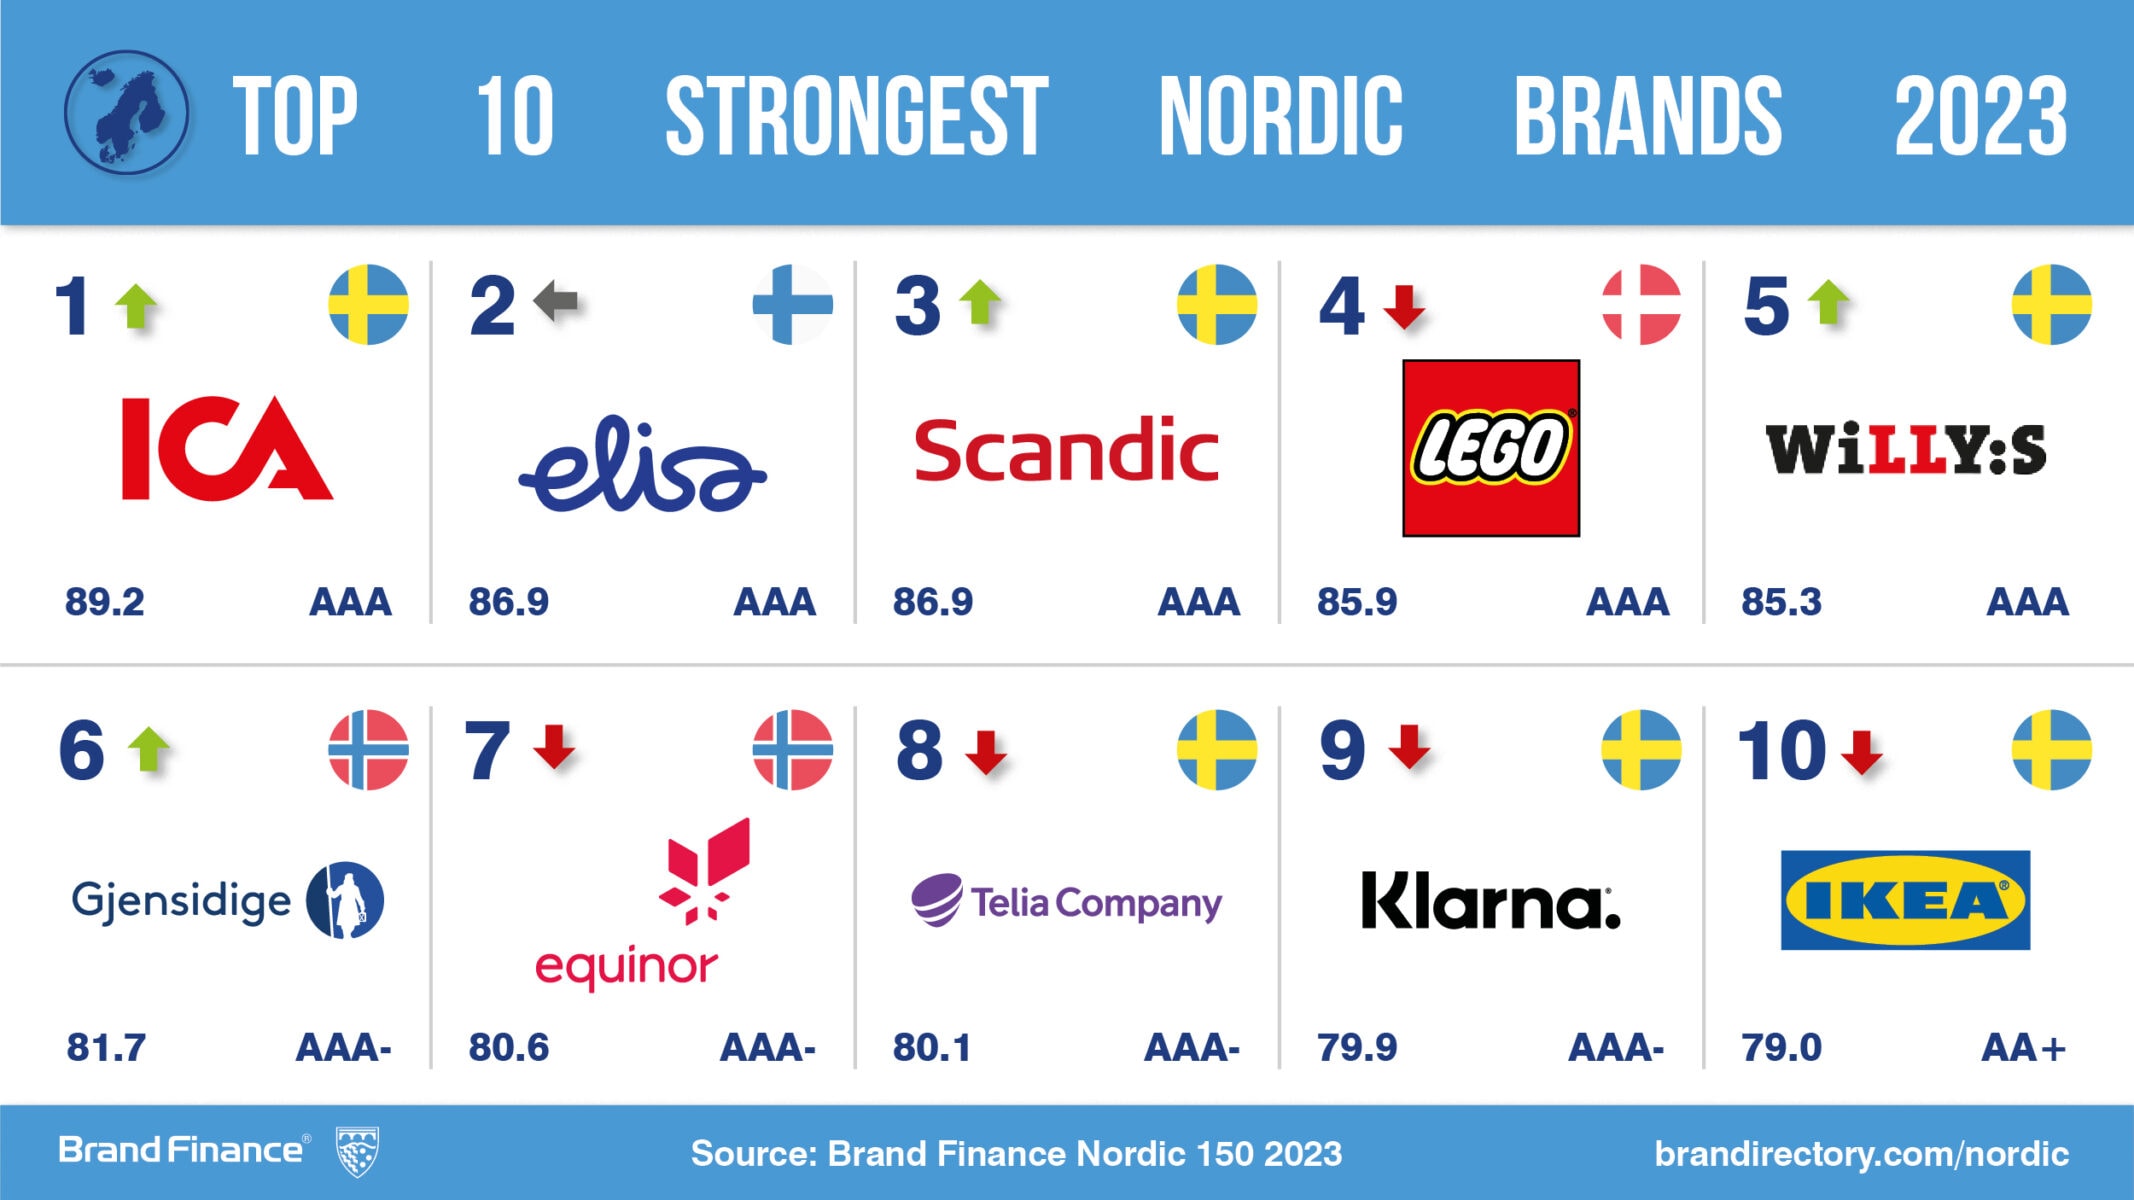 IKEA is reigning champion of Nordic brands but contends with